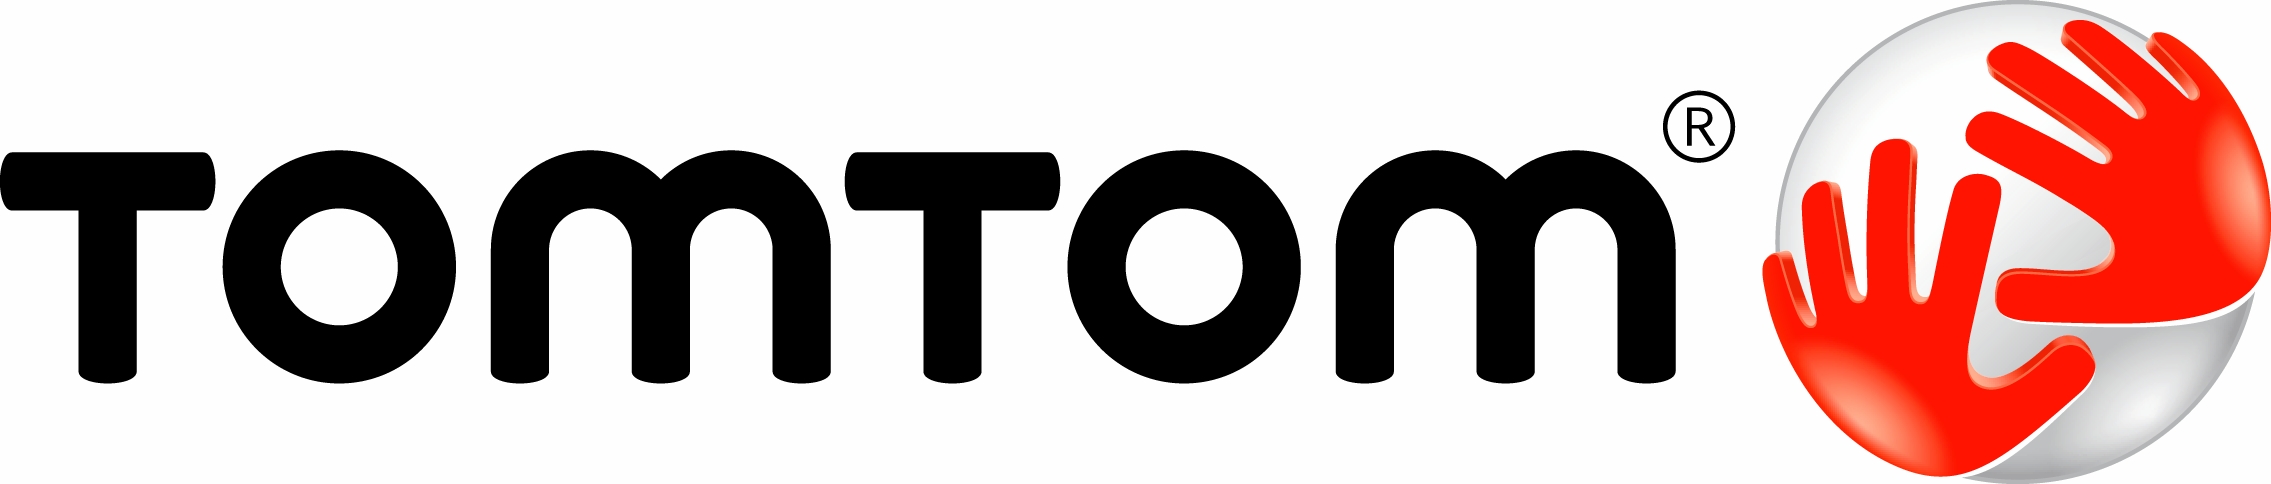 TOMTOM introduces award-winning product portfolio in Russia « Road ...